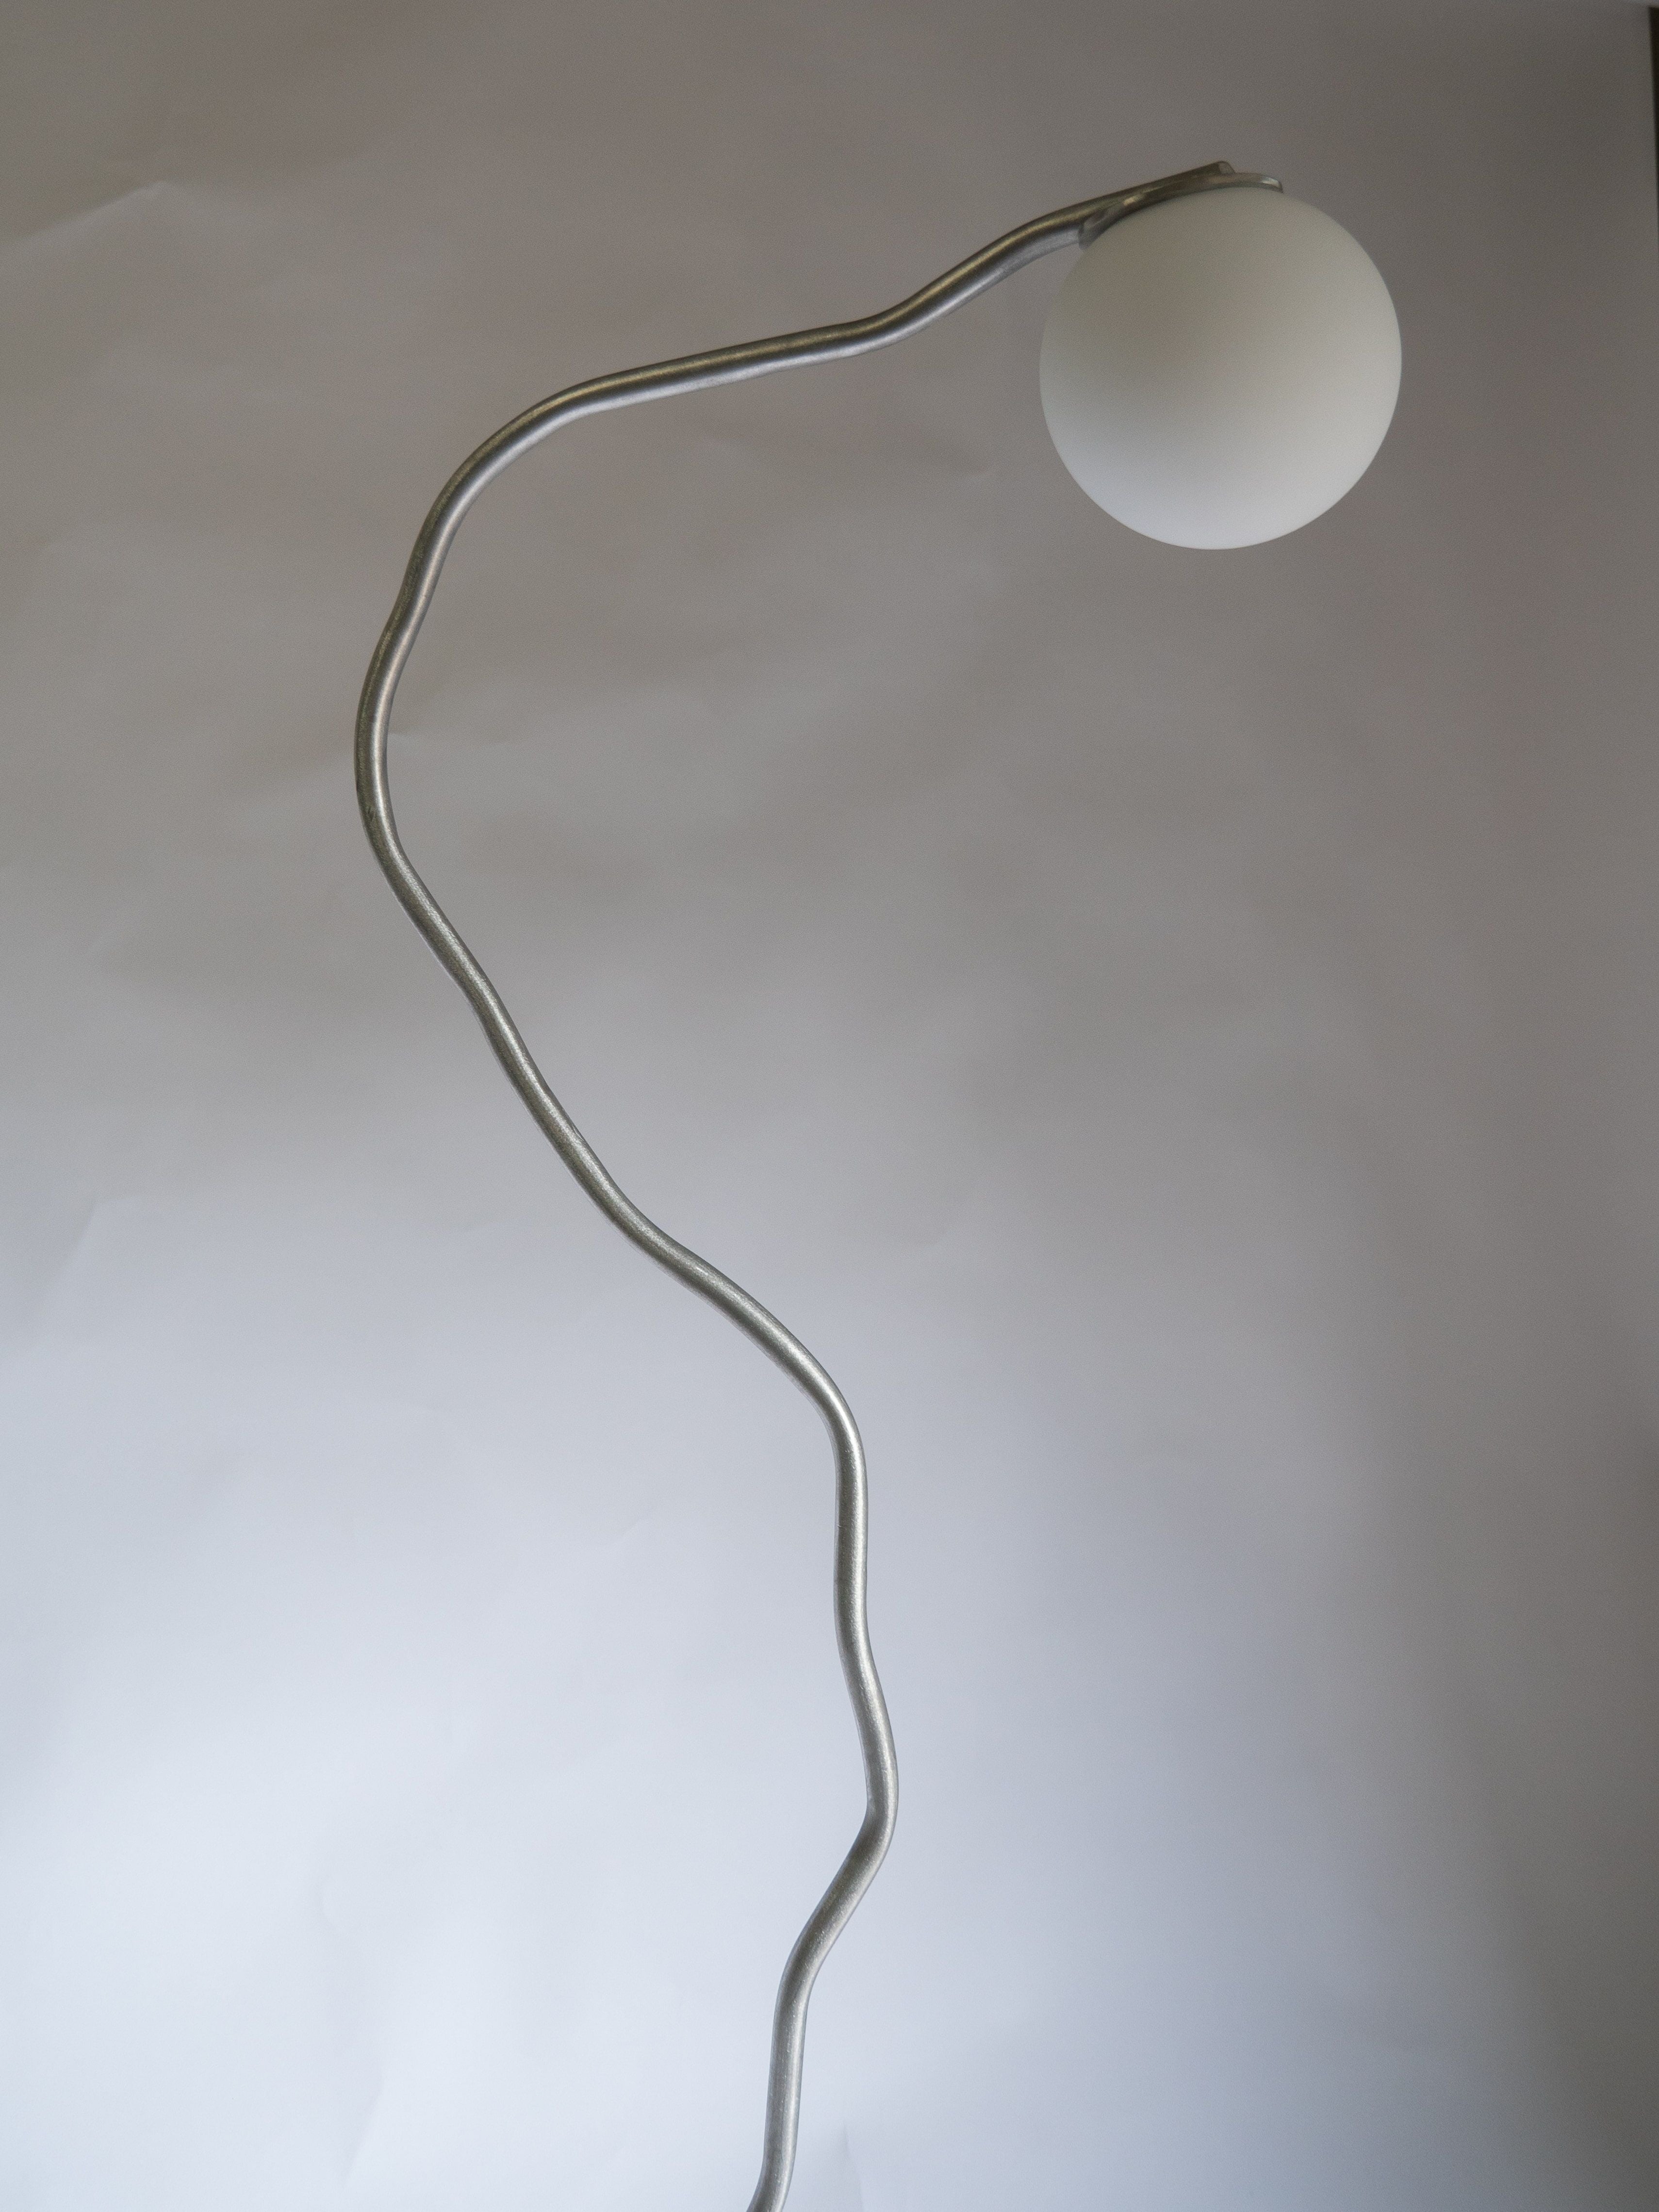 A modern Pea Head Floor Lamp by Six Dots Design with a thin, wavy metal stand and a round, white lampshade at the top, set against a plain, light-colored background. This free-form lamp has a minimalist design with an artistic, curving structure that adds natural ambience to any space.